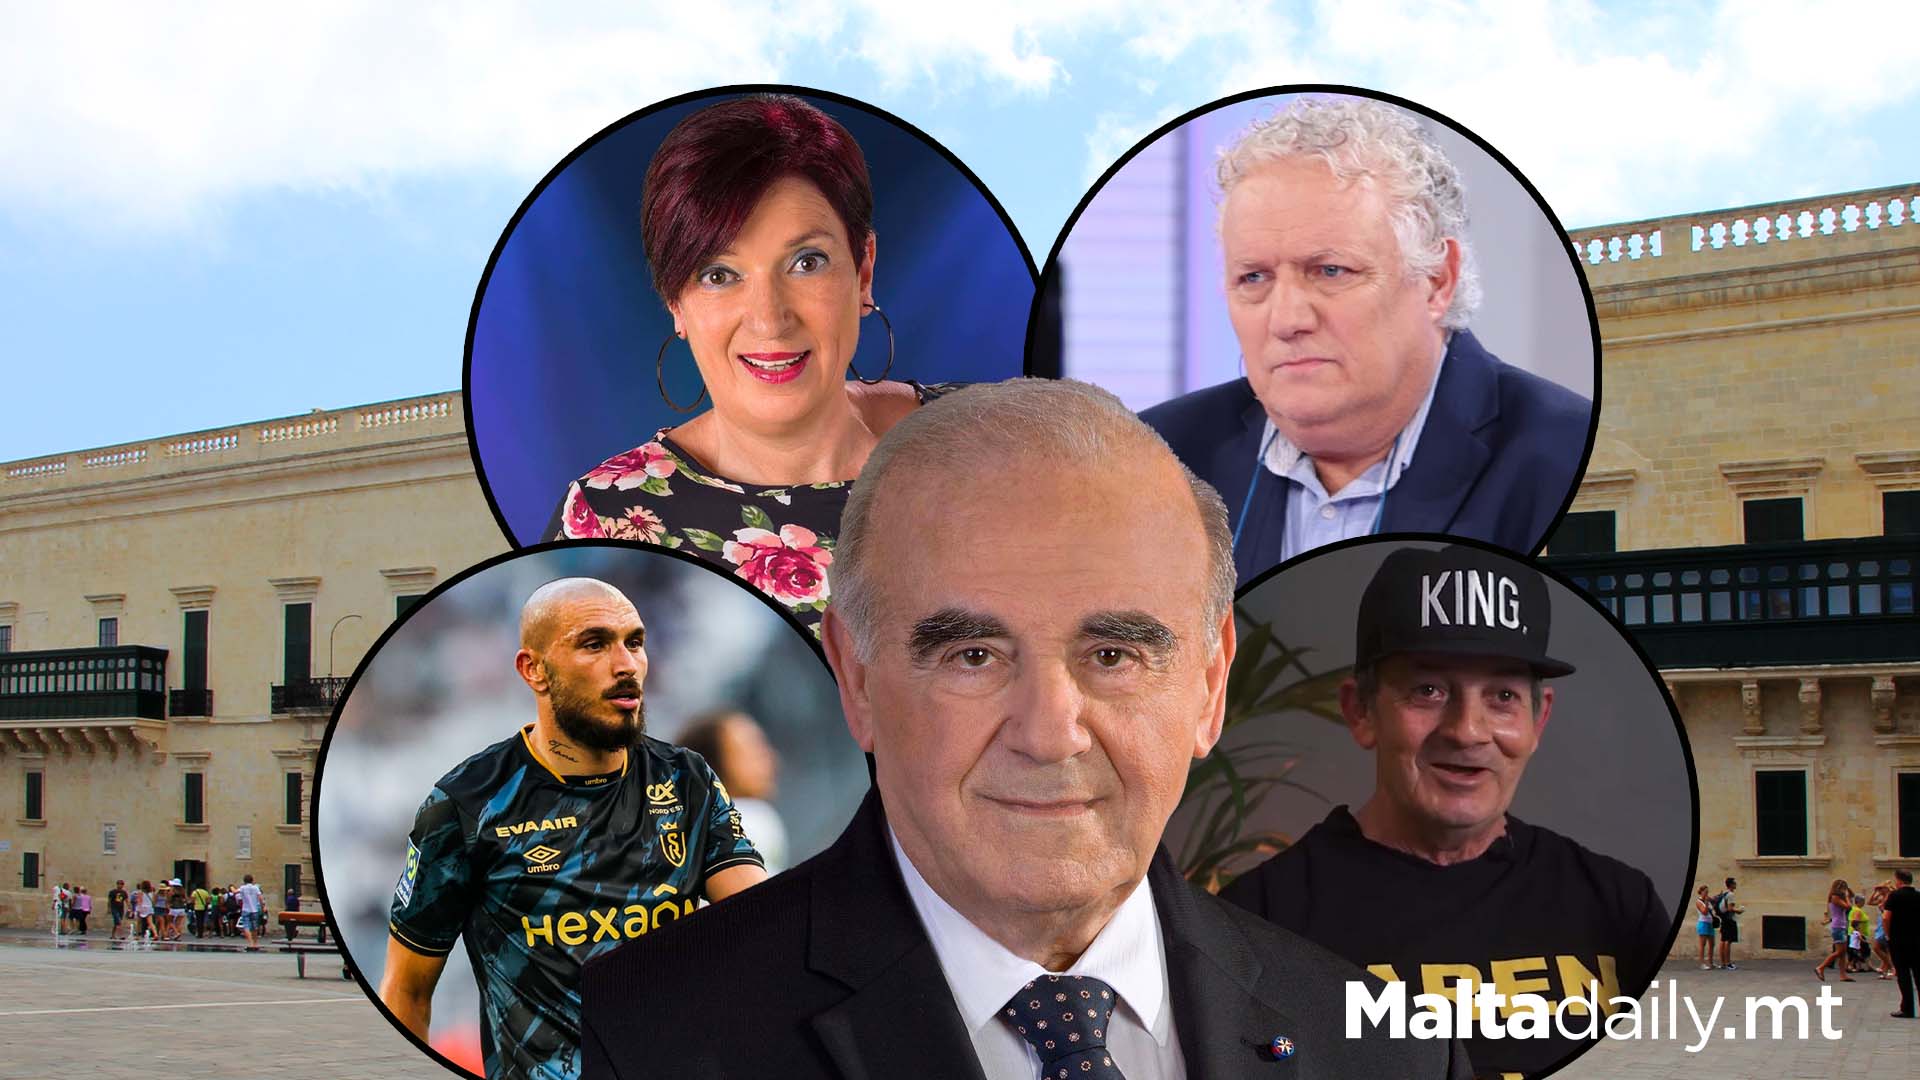 Here's Who You Think Malta's President Should Be